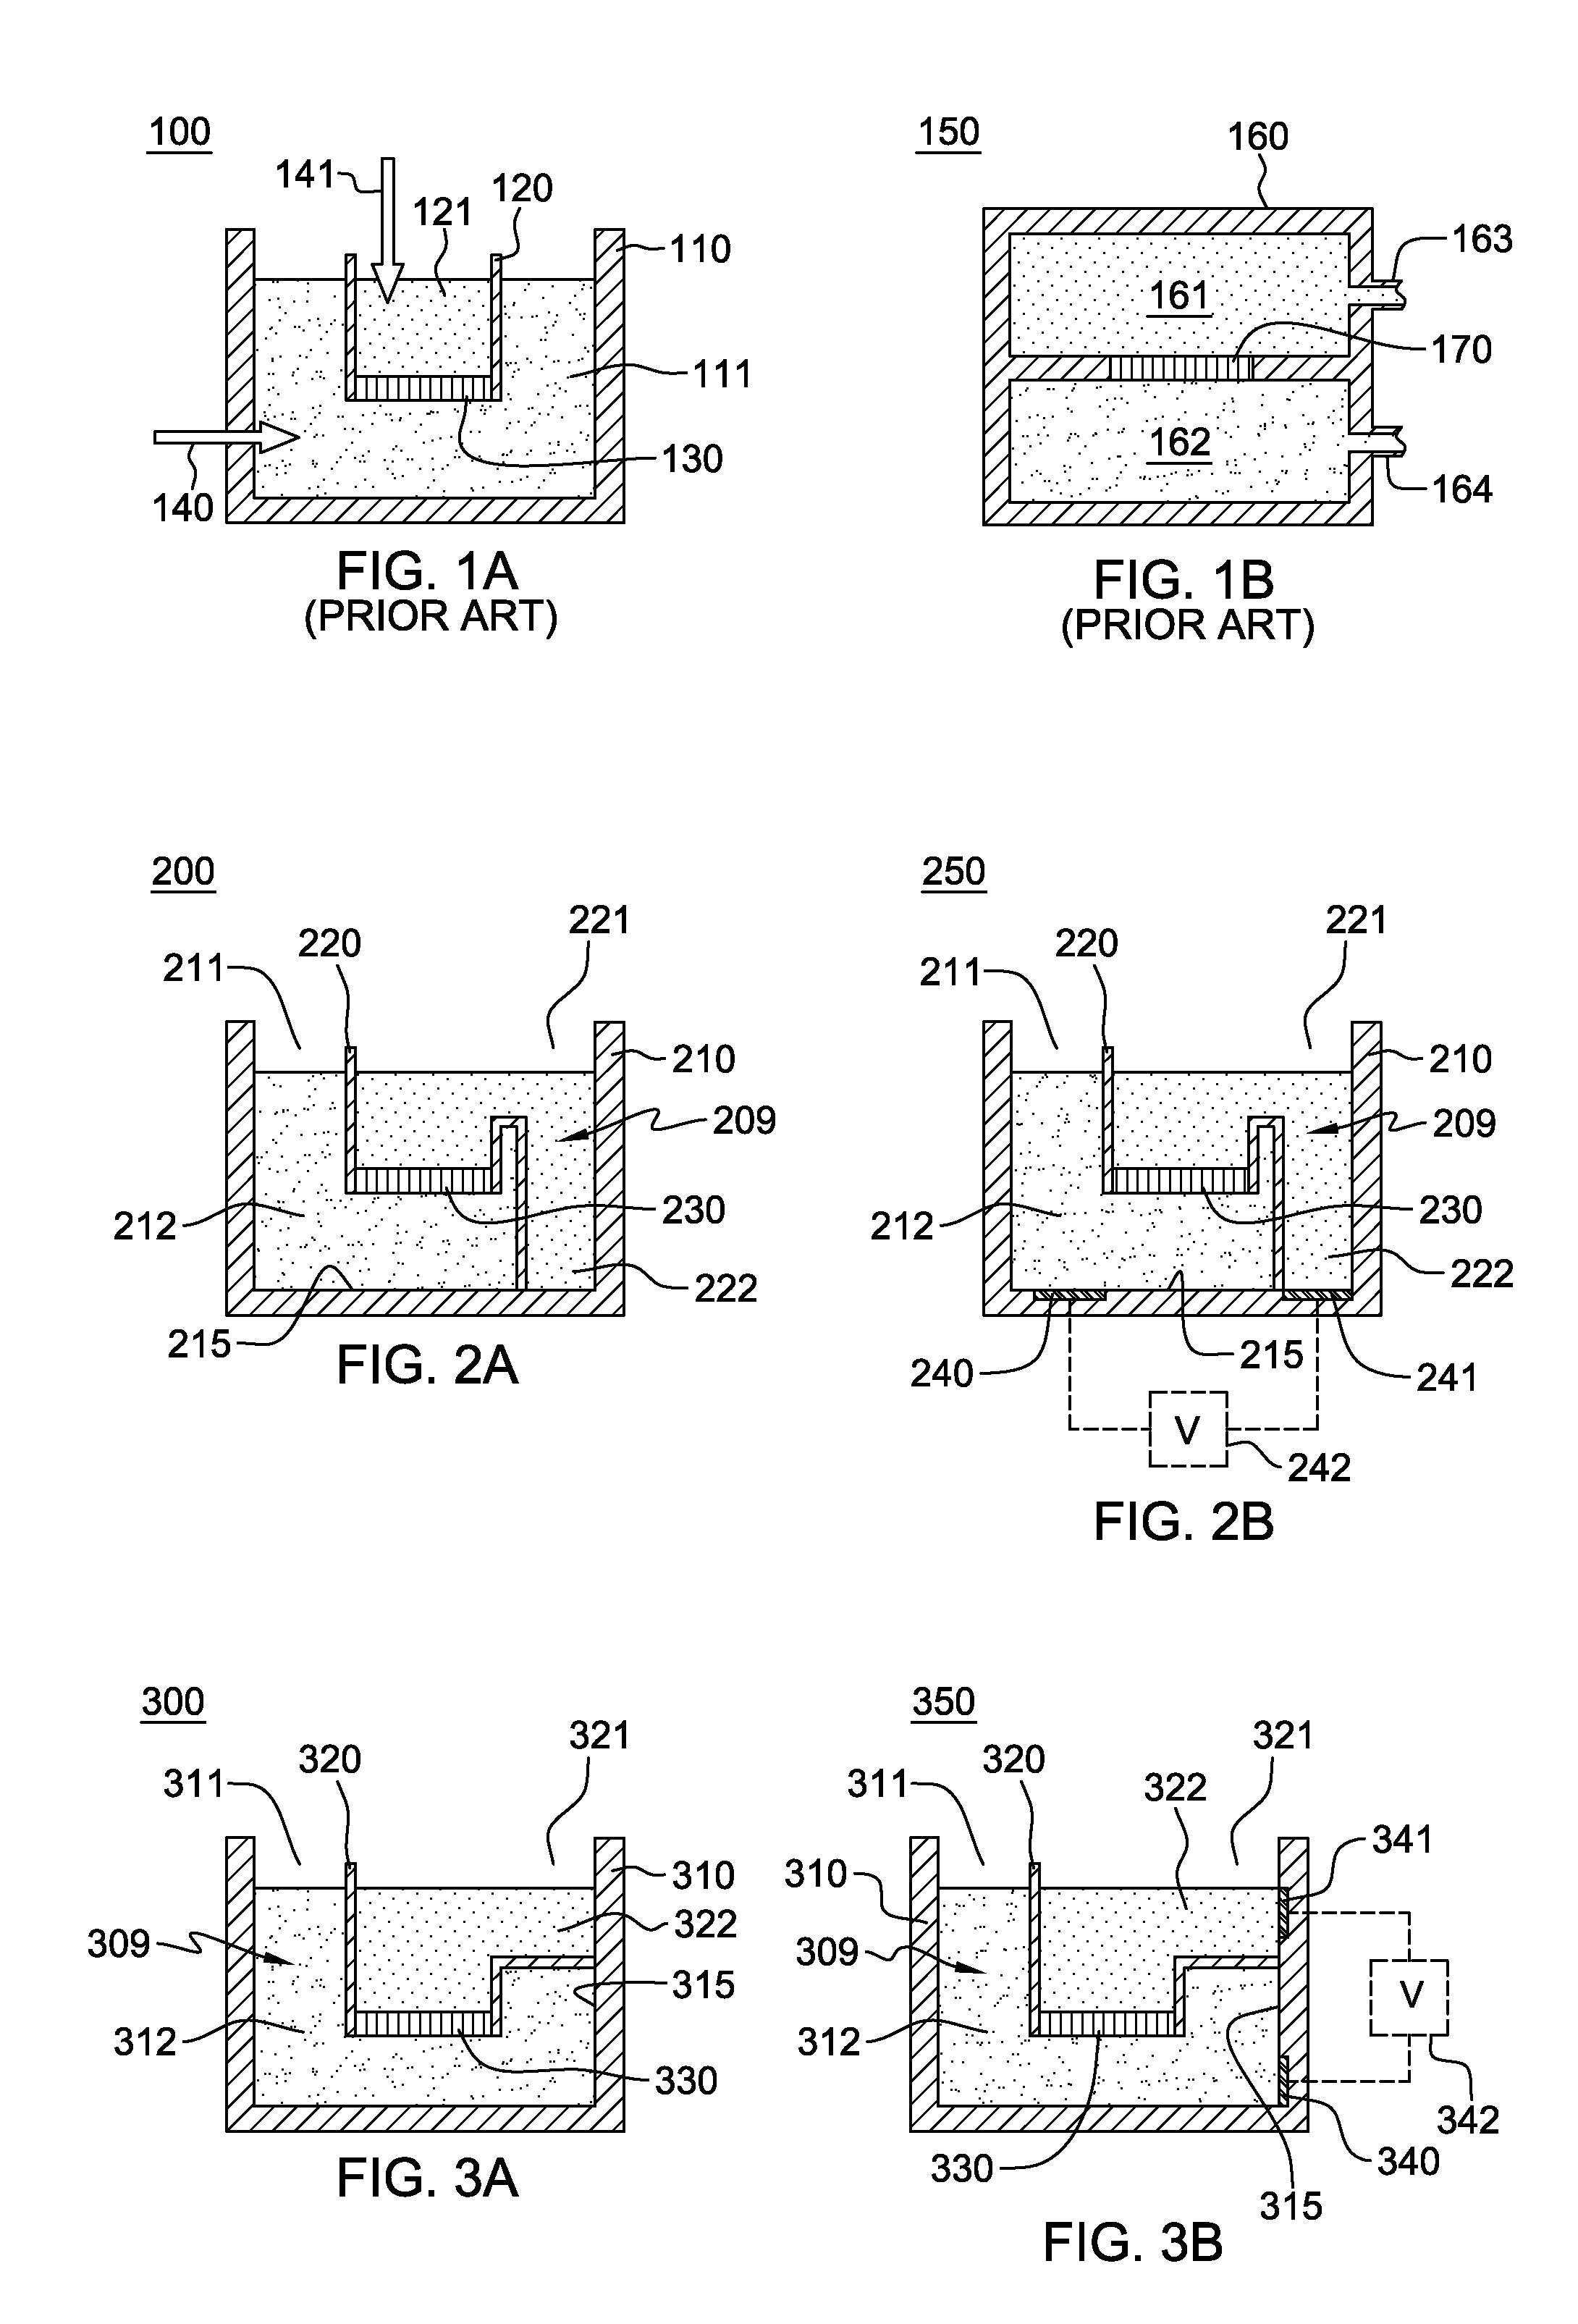 Filter device for facilitating characterizing behavior of cells